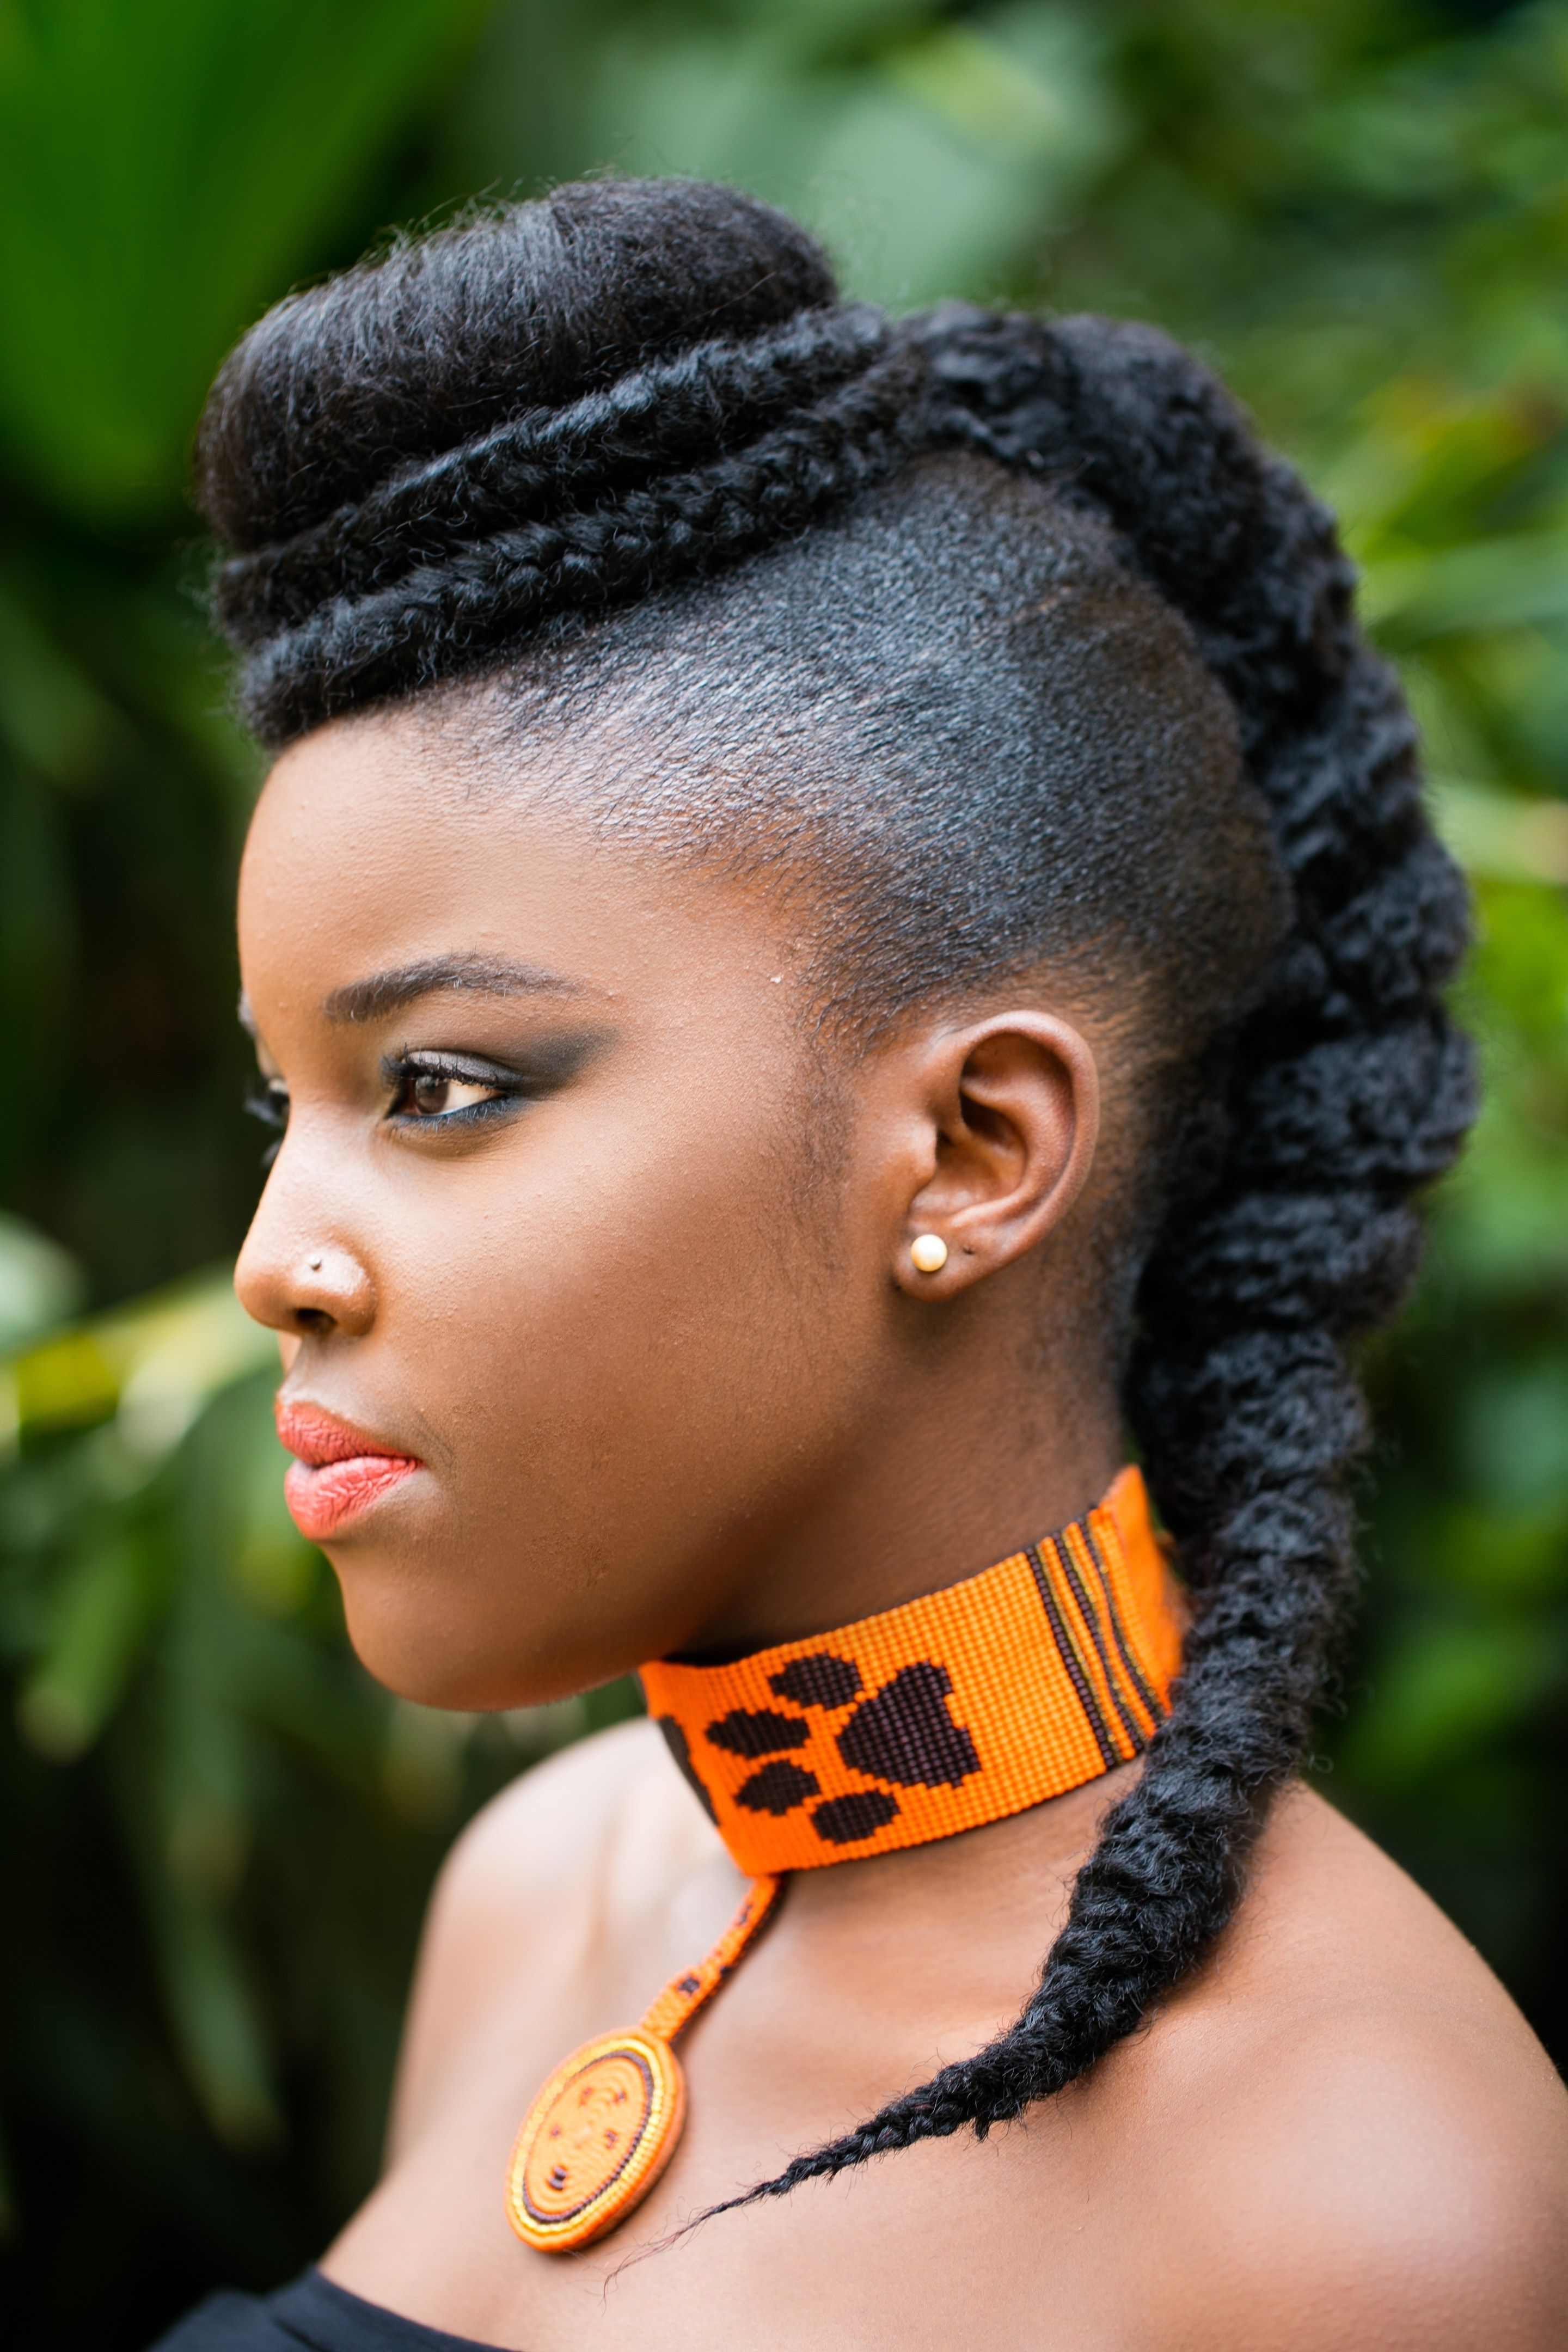 [%well Known Kenyan Cornrows Hairstyles With Regard To Pics] Nairobi Salon Gives Natural Hair Makeovers To 30 Kenyan Women|pics] Nairobi Salon Gives Natural Hair Makeovers To 30 Kenyan Women For 2018 Kenyan Cornrows Hairstyles%] (View 15 of 15)